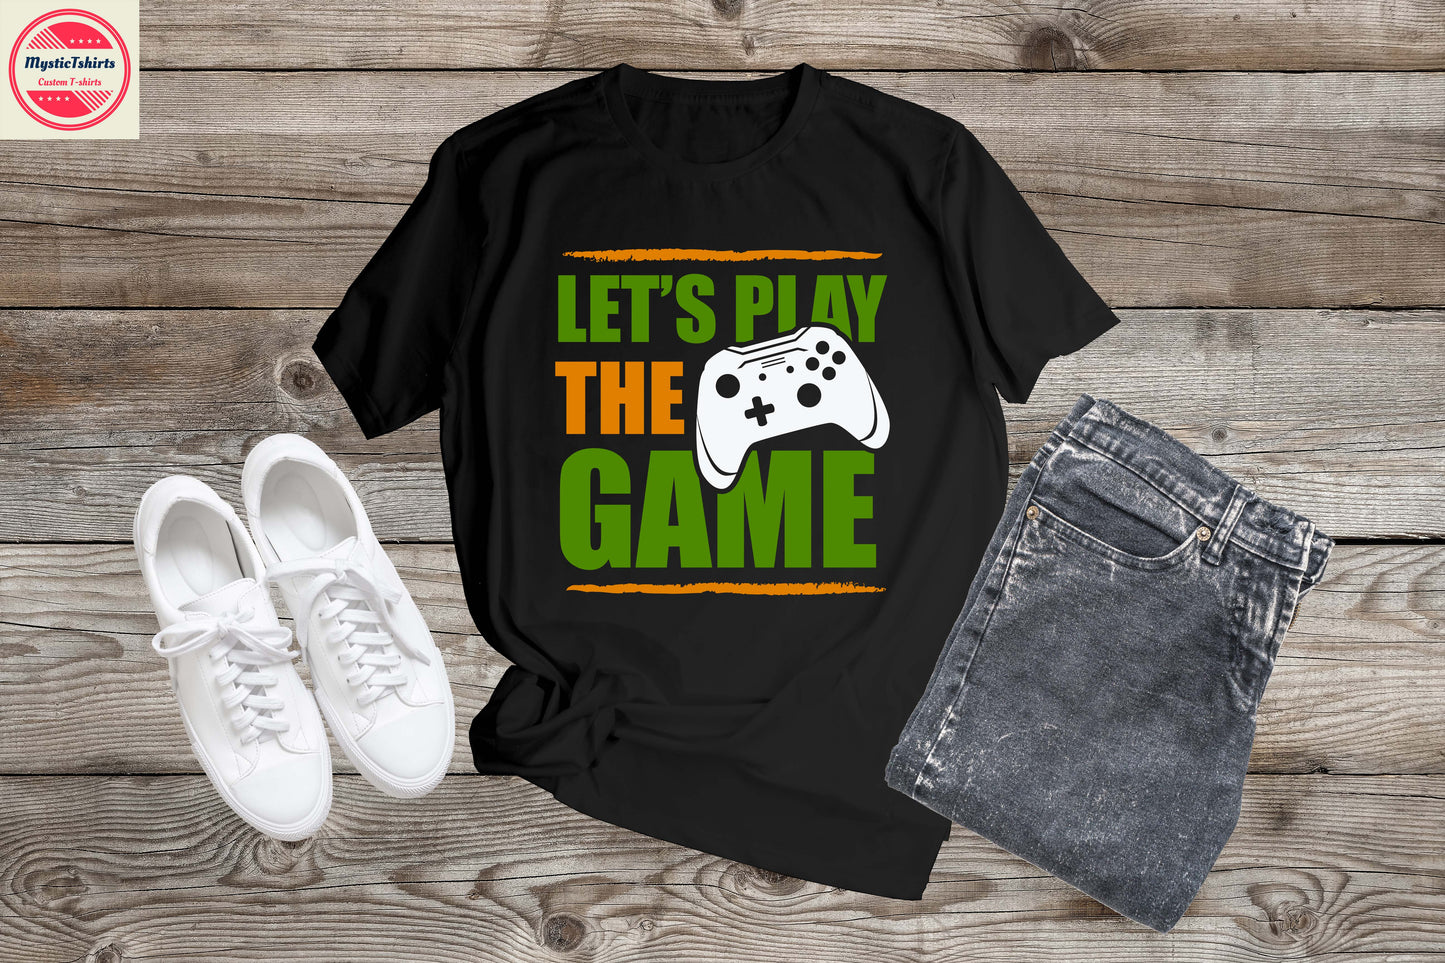 286. LET'S PLAY THE GAME, Custom Made Shirt, Personalized T-Shirt, Custom Text, Make Your Own Shirt, Custom Tee